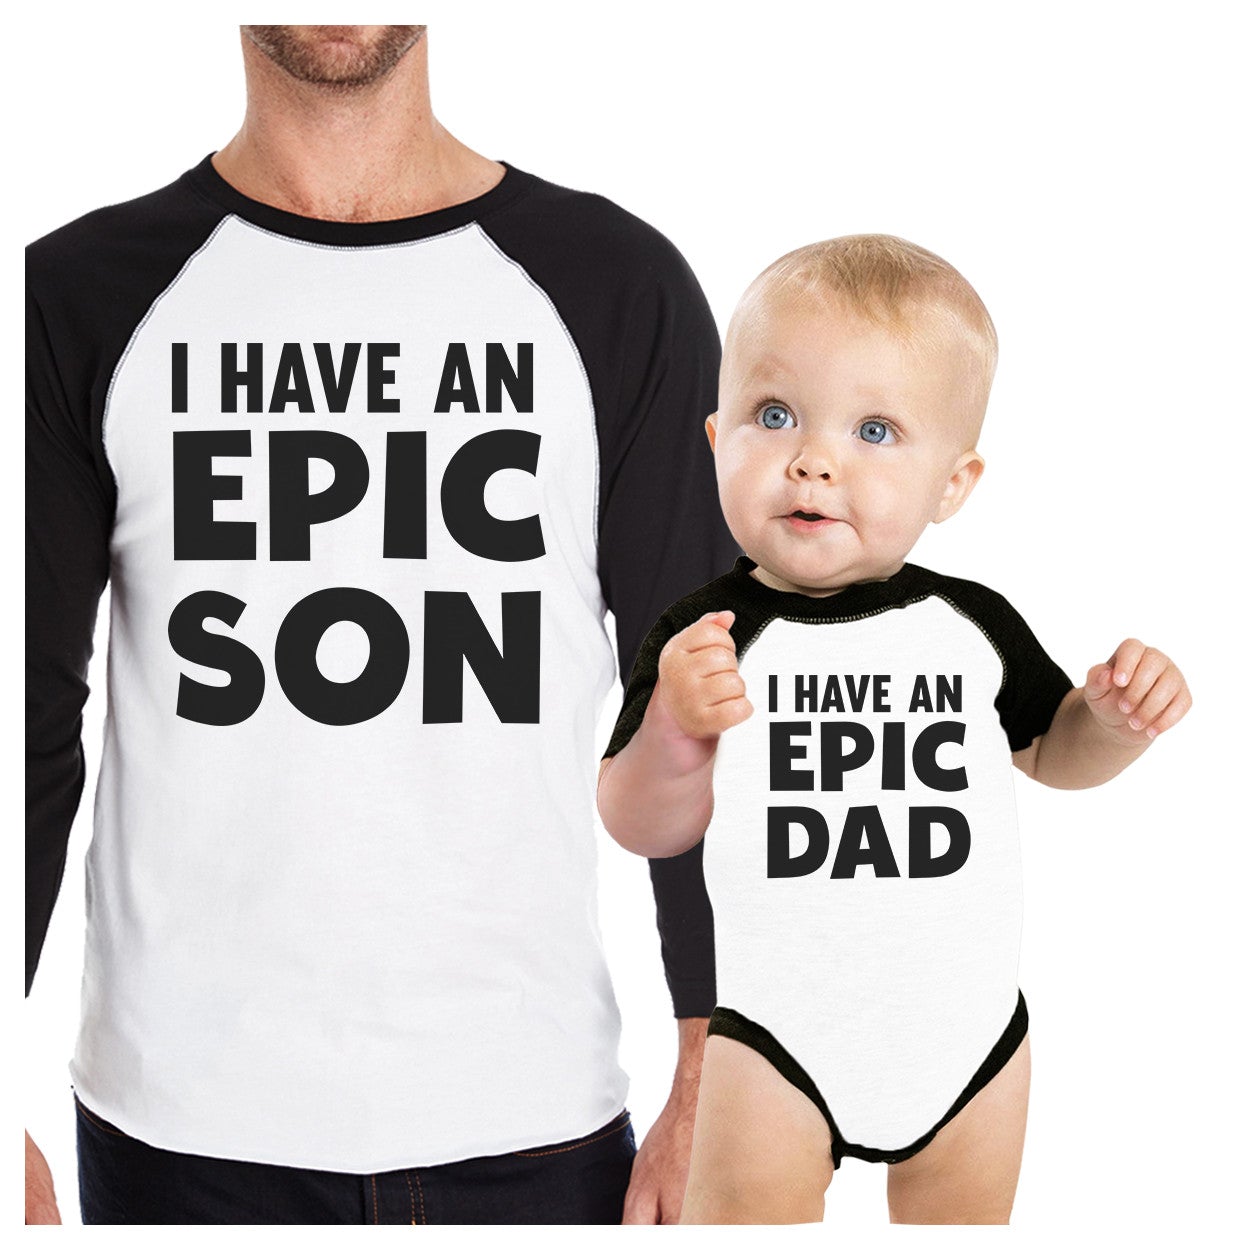 I Have An Epic Son Epic Dad Dad and Baby Matching Black And White Baseball Shirts